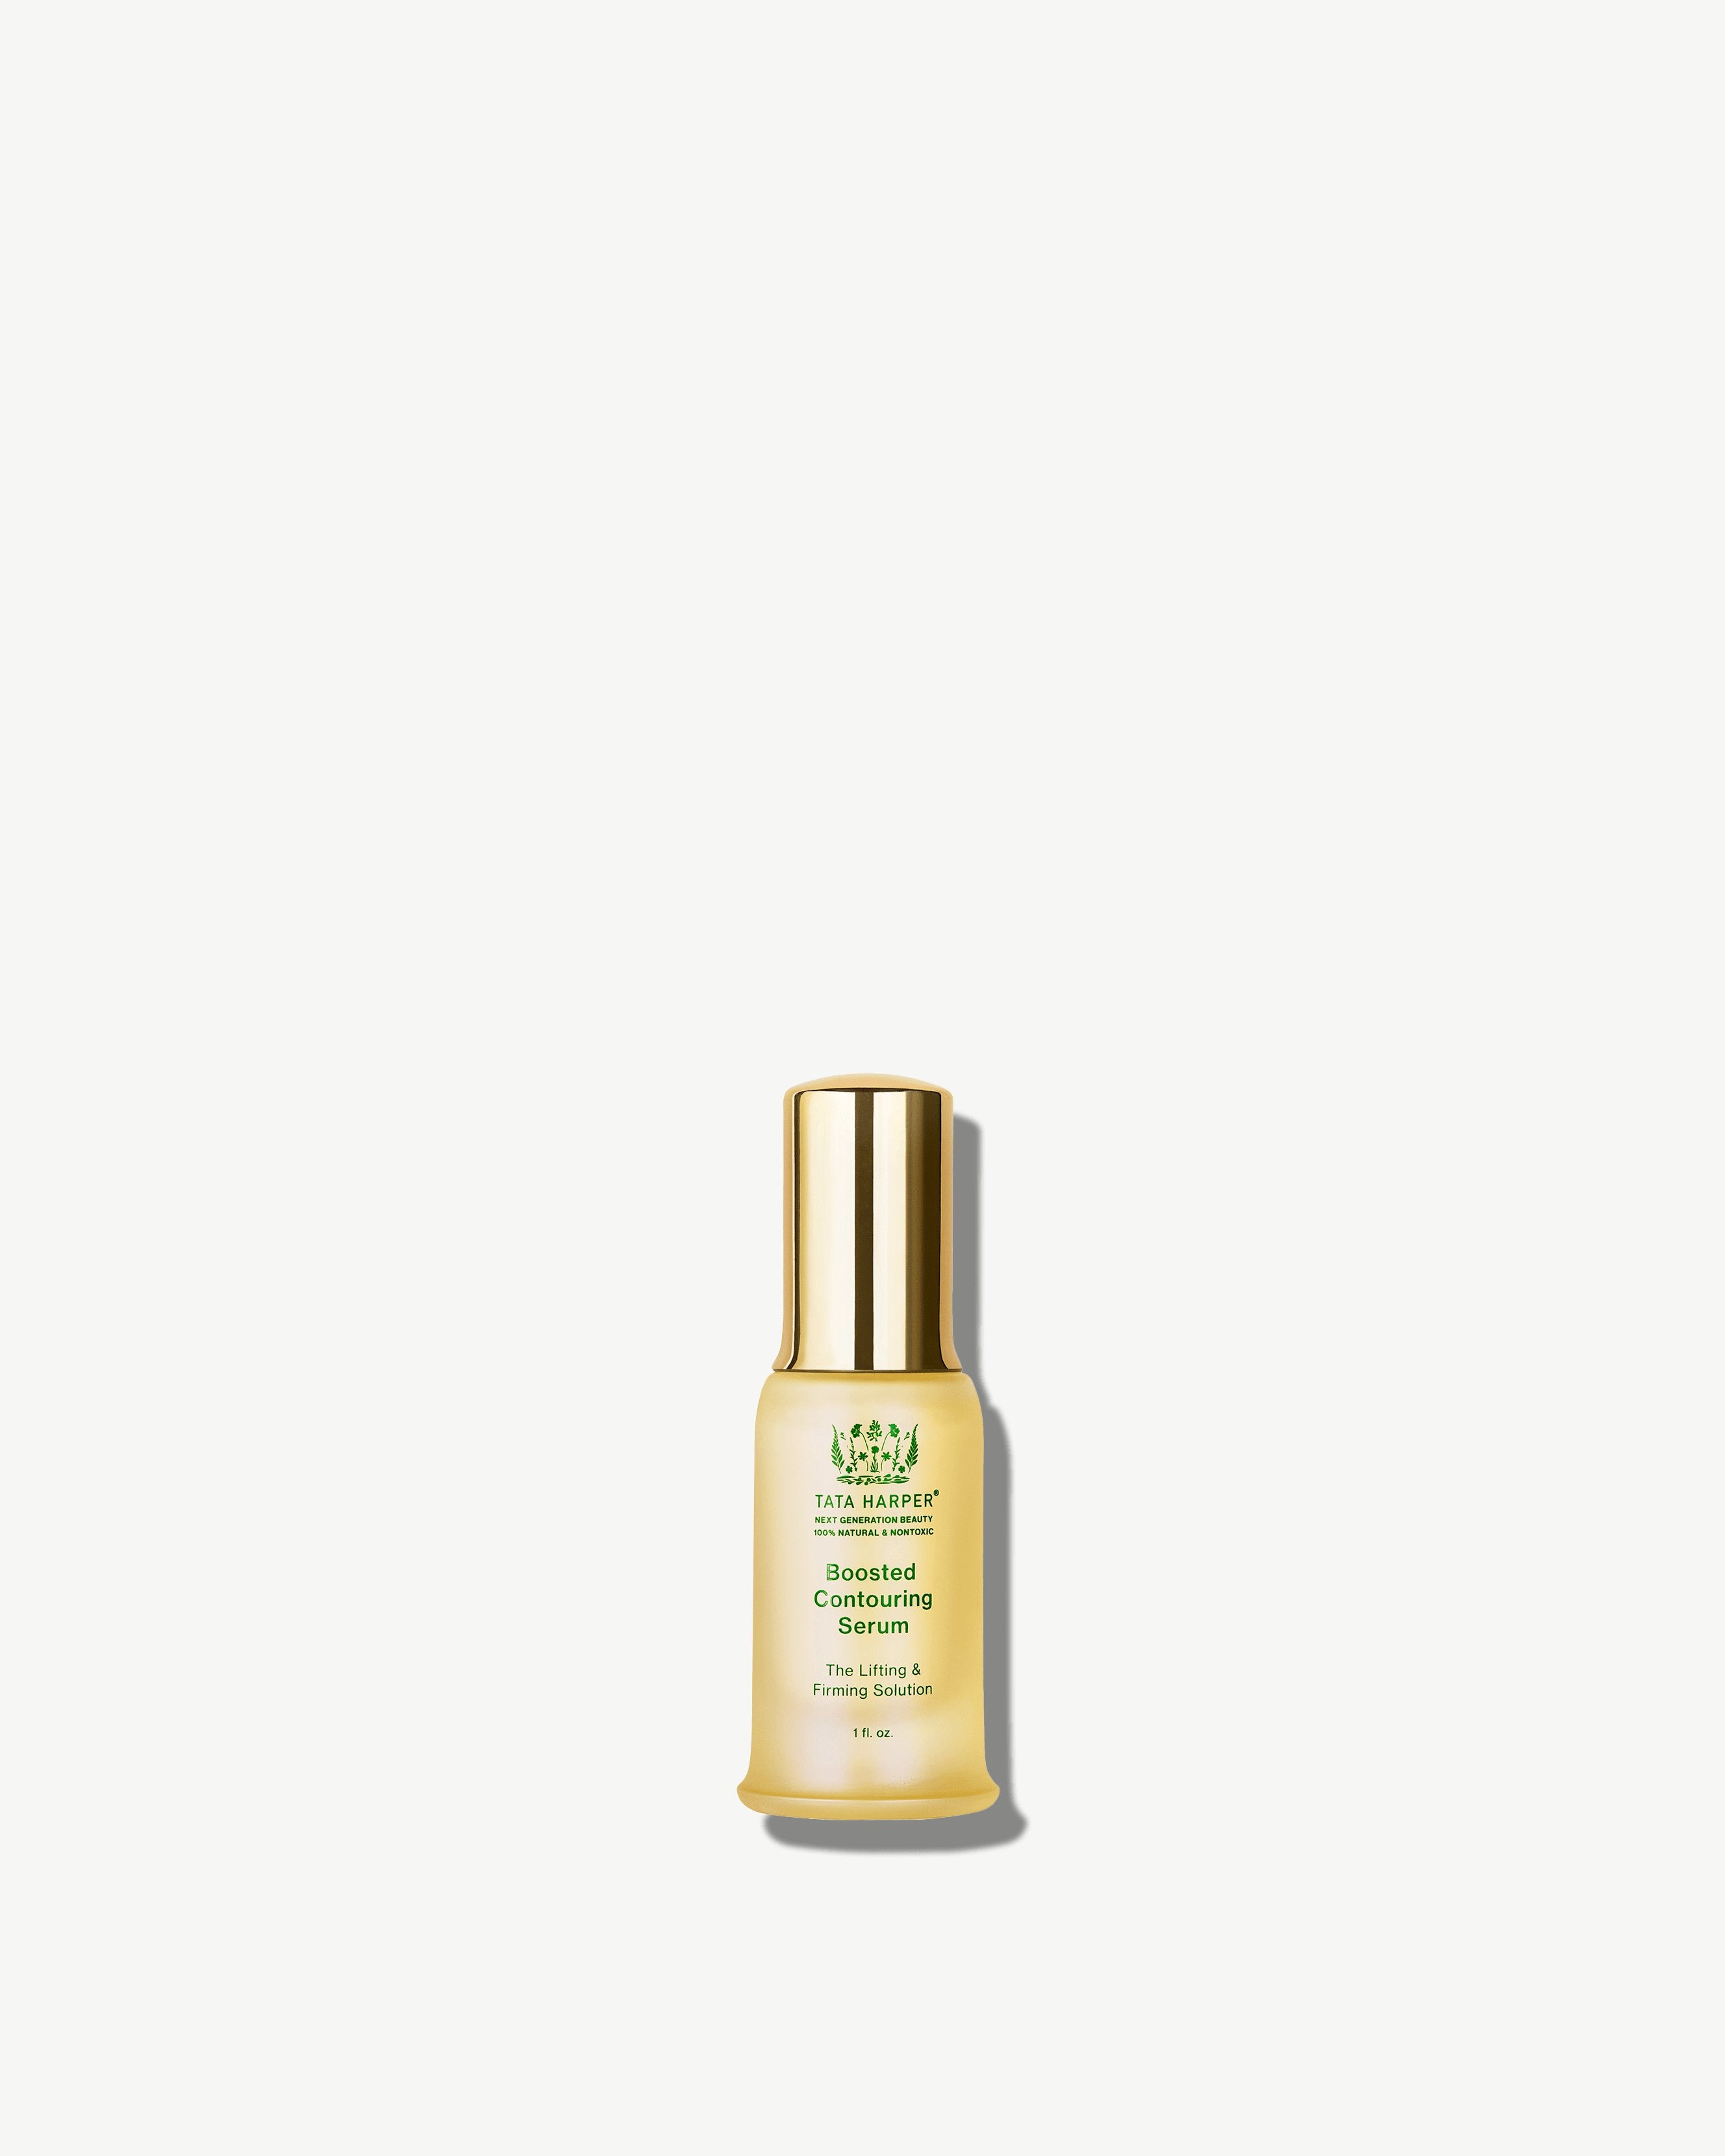 Boosted Contouring Serum 2.0